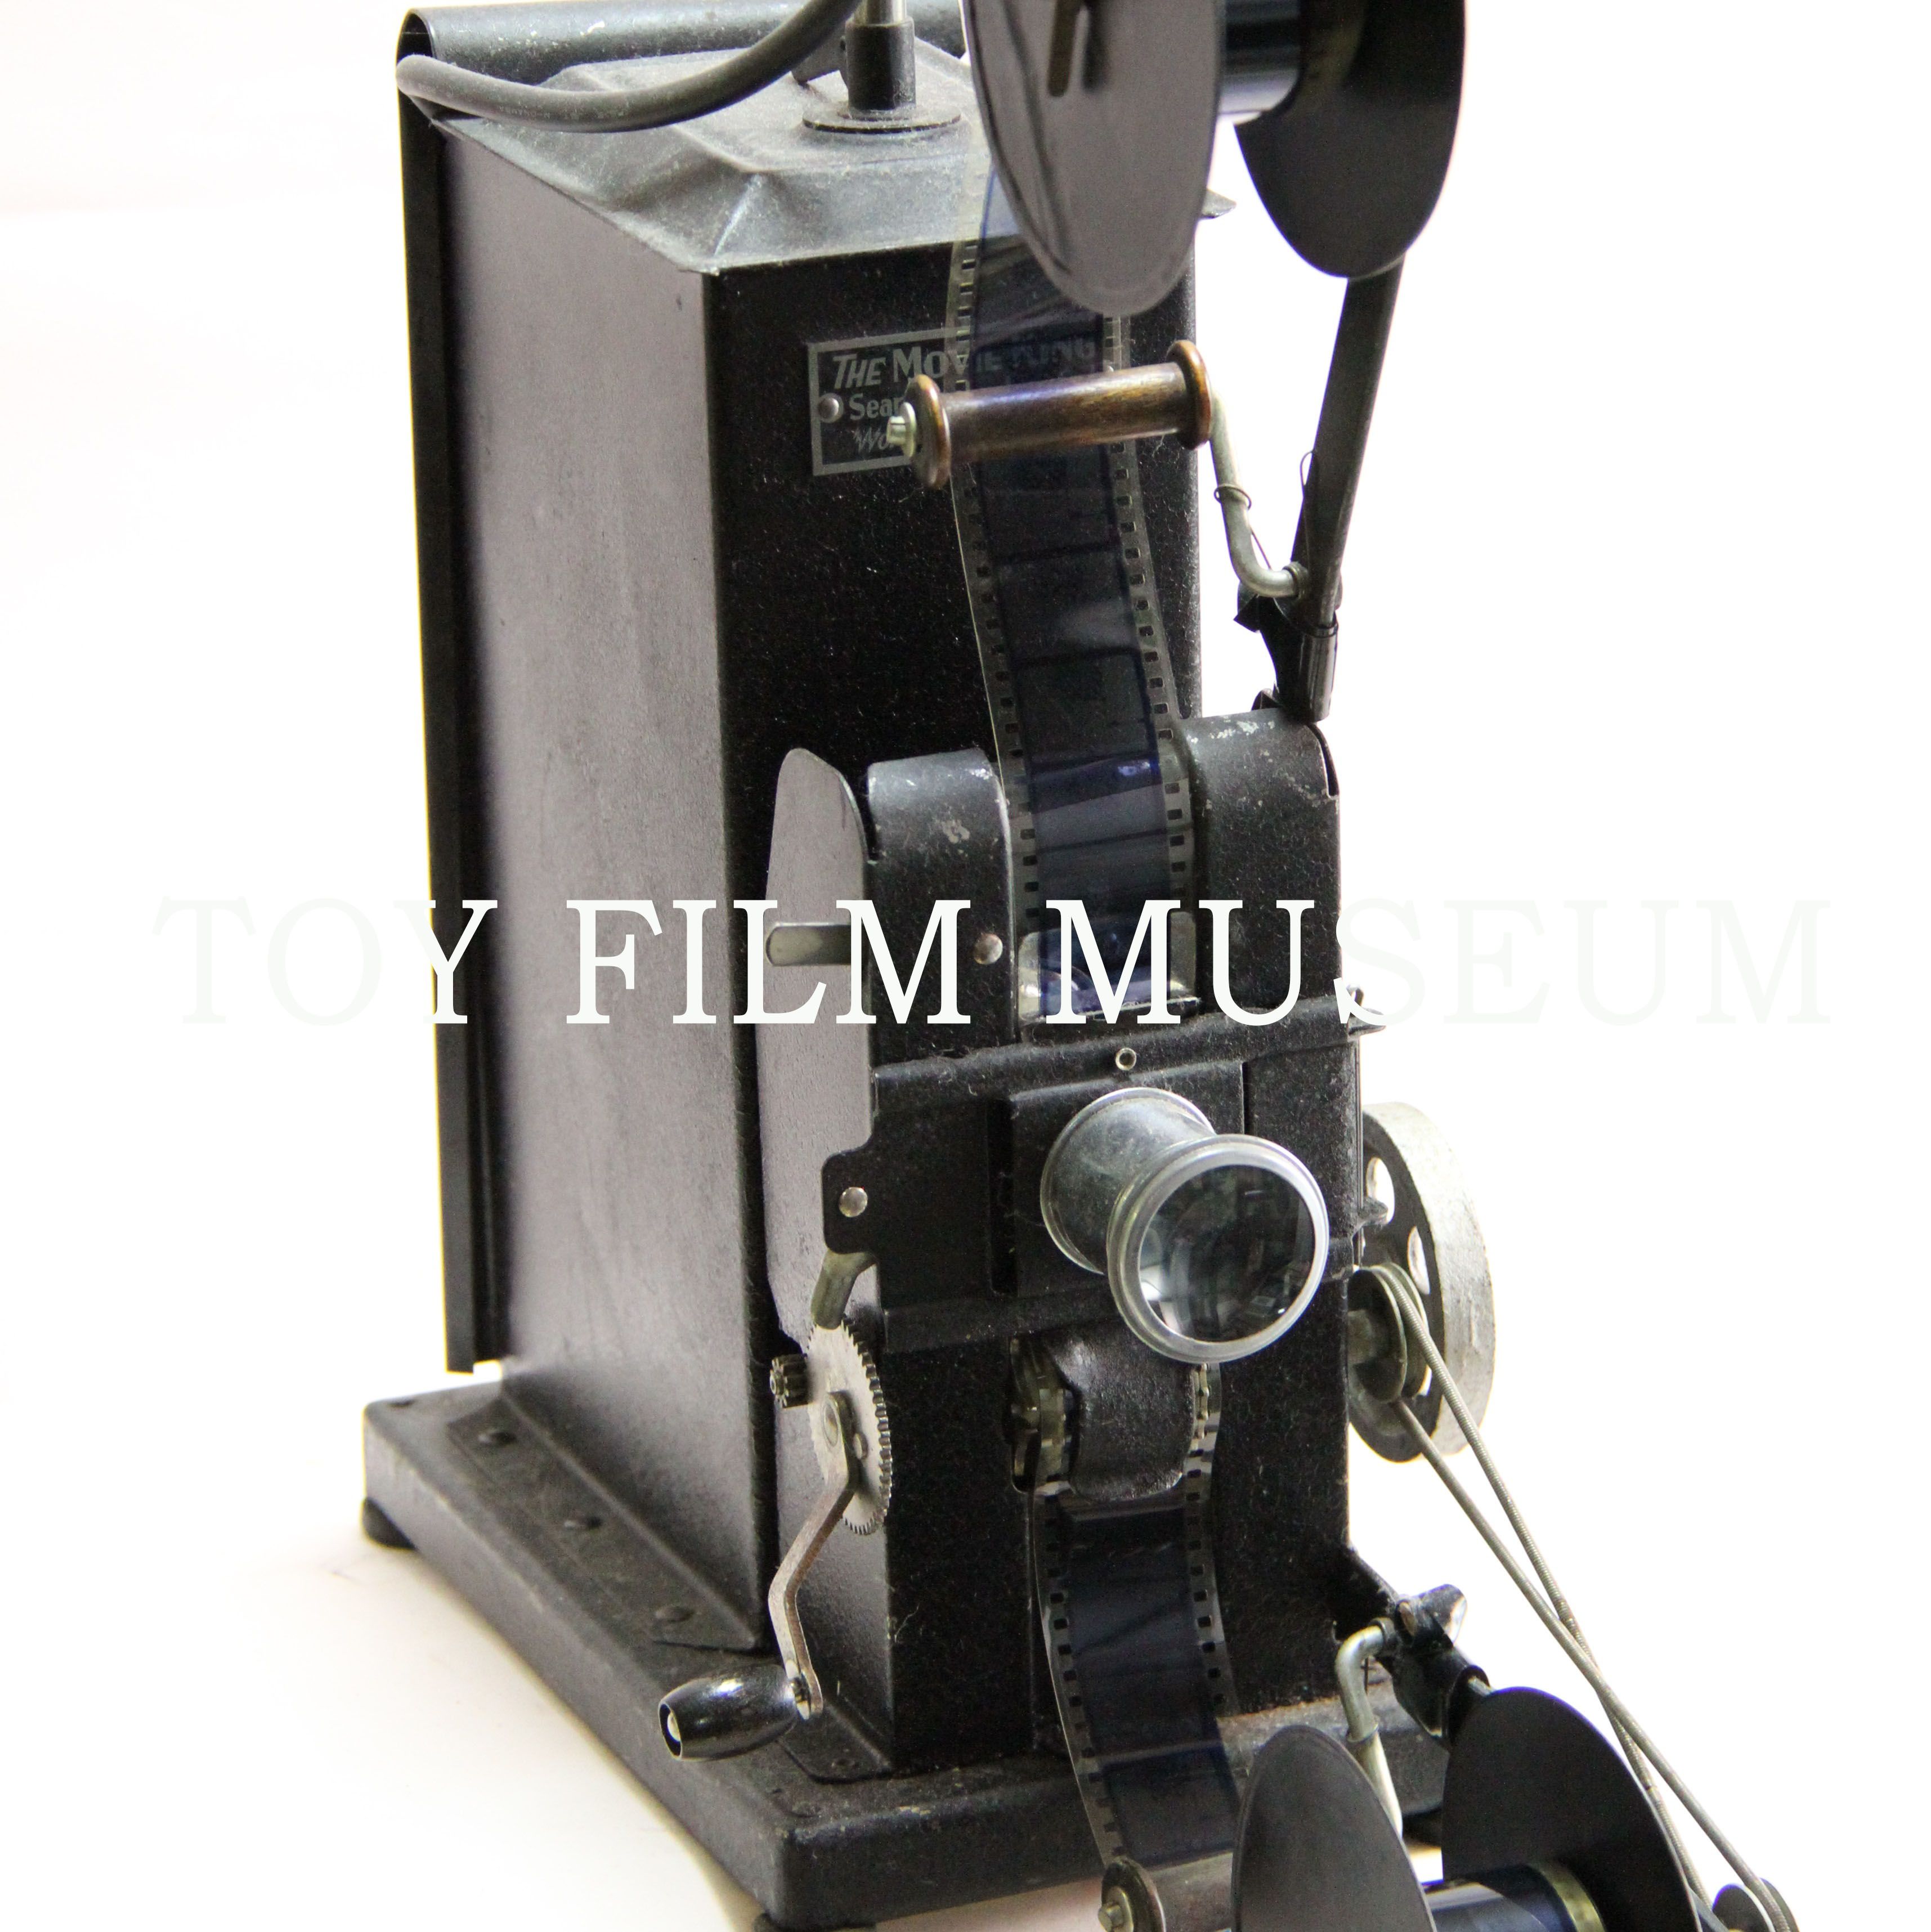 The Movie King 35mm Projector